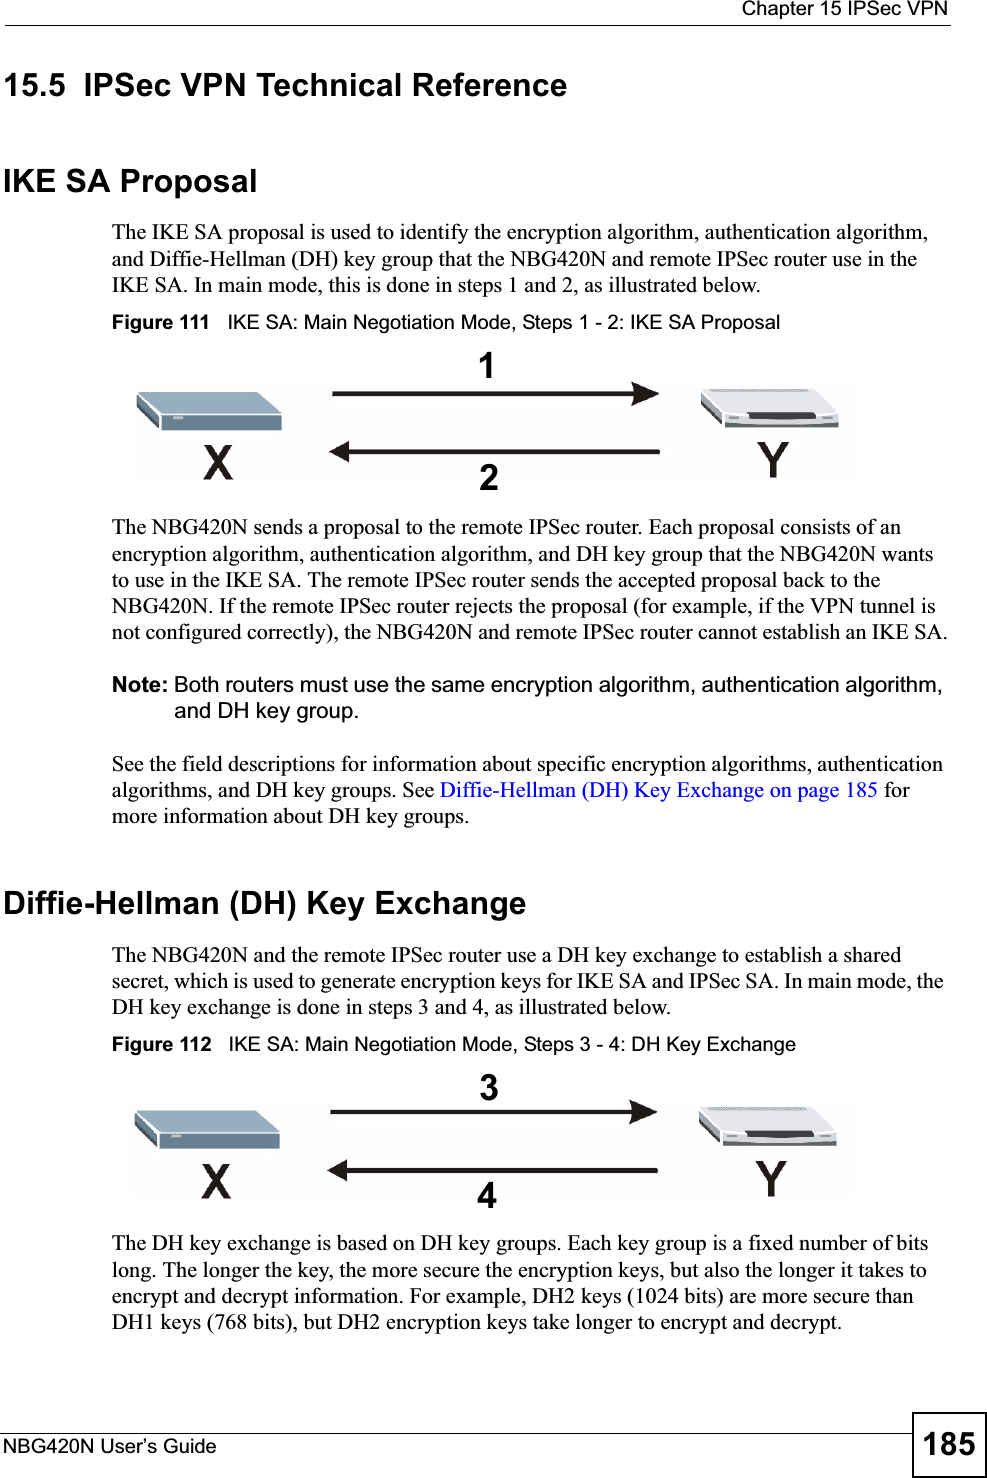  Chapter 15 IPSec VPNNBG420N User’s Guide 18515.5  IPSec VPN Technical ReferenceIKE SA ProposalThe IKE SA proposal is used to identify the encryption algorithm, authentication algorithm, and Diffie-Hellman (DH) key group that the NBG420N and remote IPSec router use in the IKE SA. In main mode, this is done in steps 1 and 2, as illustrated below.Figure 111   IKE SA: Main Negotiation Mode, Steps 1 - 2: IKE SA ProposalThe NBG420N sends a proposal to the remote IPSec router. Each proposal consists of an encryption algorithm, authentication algorithm, and DH key group that the NBG420N wants to use in the IKE SA. The remote IPSec router sends the accepted proposal back to the NBG420N. If the remote IPSec router rejects the proposal (for example, if the VPN tunnel is not configured correctly), the NBG420N and remote IPSec router cannot establish an IKE SA.Note: Both routers must use the same encryption algorithm, authentication algorithm, and DH key group.See the field descriptions for information about specific encryption algorithms, authentication algorithms, and DH key groups. See Diffie-Hellman (DH) Key Exchange on page 185 for more information about DH key groups.Diffie-Hellman (DH) Key ExchangeThe NBG420N and the remote IPSec router use a DH key exchange to establish a shared secret, which is used to generate encryption keys for IKE SA and IPSec SA. In main mode, the DH key exchange is done in steps 3 and 4, as illustrated below.Figure 112   IKE SA: Main Negotiation Mode, Steps 3 - 4: DH Key ExchangeThe DH key exchange is based on DH key groups. Each key group is a fixed number of bits long. The longer the key, the more secure the encryption keys, but also the longer it takes to encrypt and decrypt information. For example, DH2 keys (1024 bits) are more secure than DH1 keys (768 bits), but DH2 encryption keys take longer to encrypt and decrypt.1234